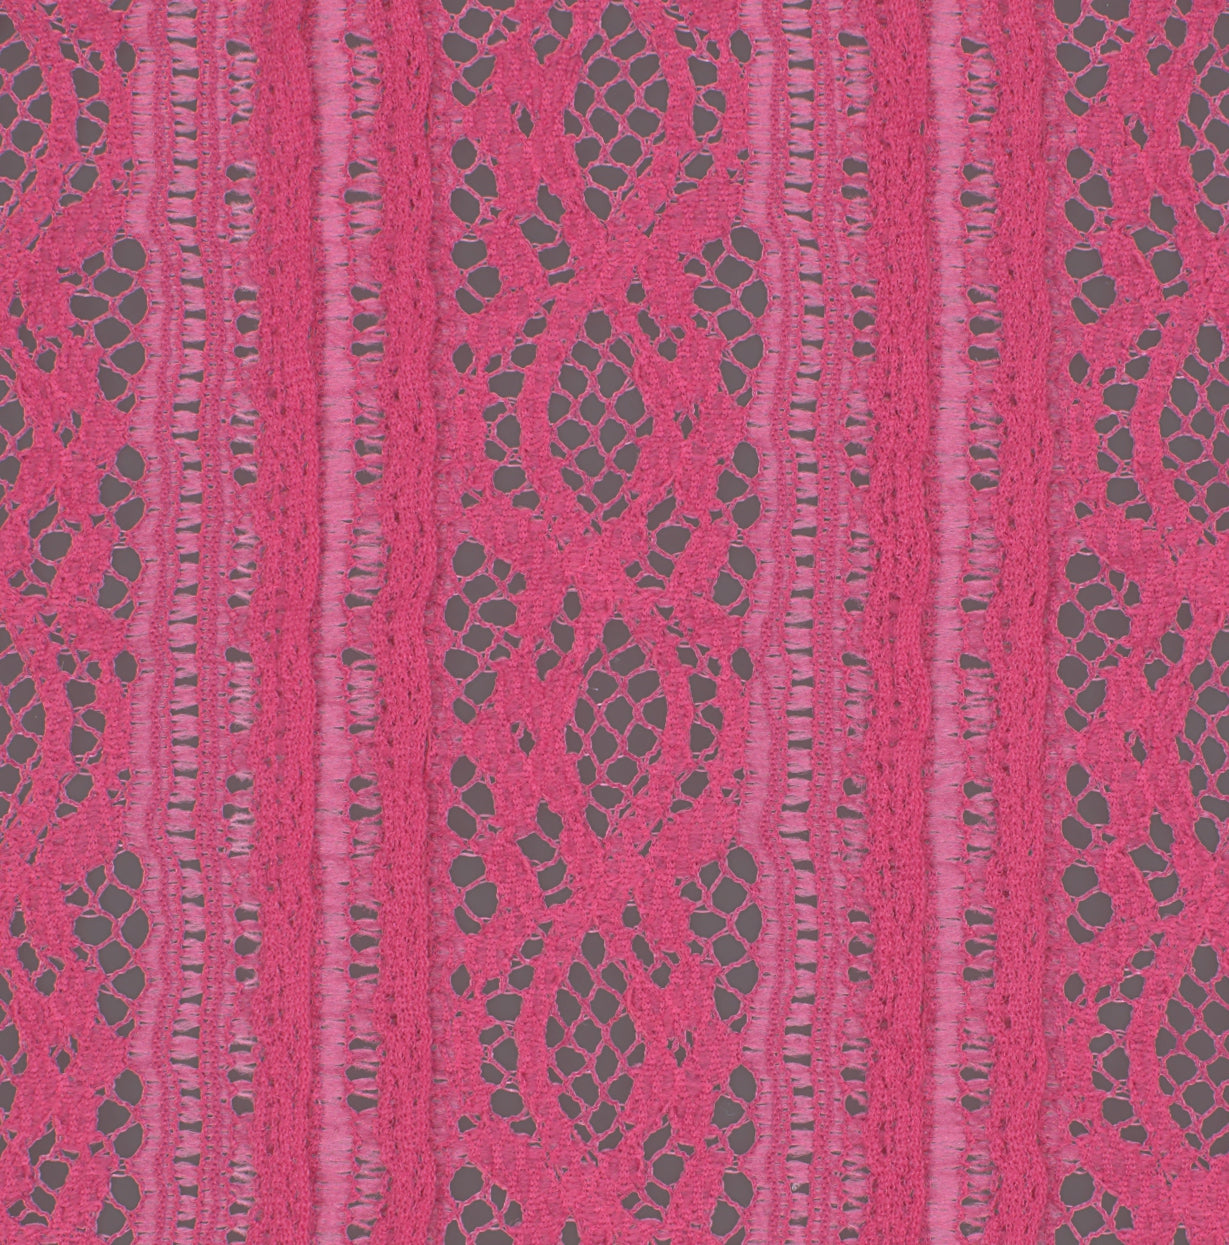 9512-02 Peach Intertwine Lace Plain Dyed Blend blend knit lace pink plain dyed spiral Lace - knit fabric - woven fabric - fabric company - fabric wholesale - fabric b2b - fabric factory - high quality fabric - hong kong fabric - fabric hk - acetate fabric - cotton fabric - linen fabric - metallic fabric - nylon fabric - polyester fabric - spandex fabric - chun wing hing - cwh hk - fabric worldwide ship - 針織布 - 梳織布 - 布料公司- 布料批發 - 香港布料 - 秦榮興